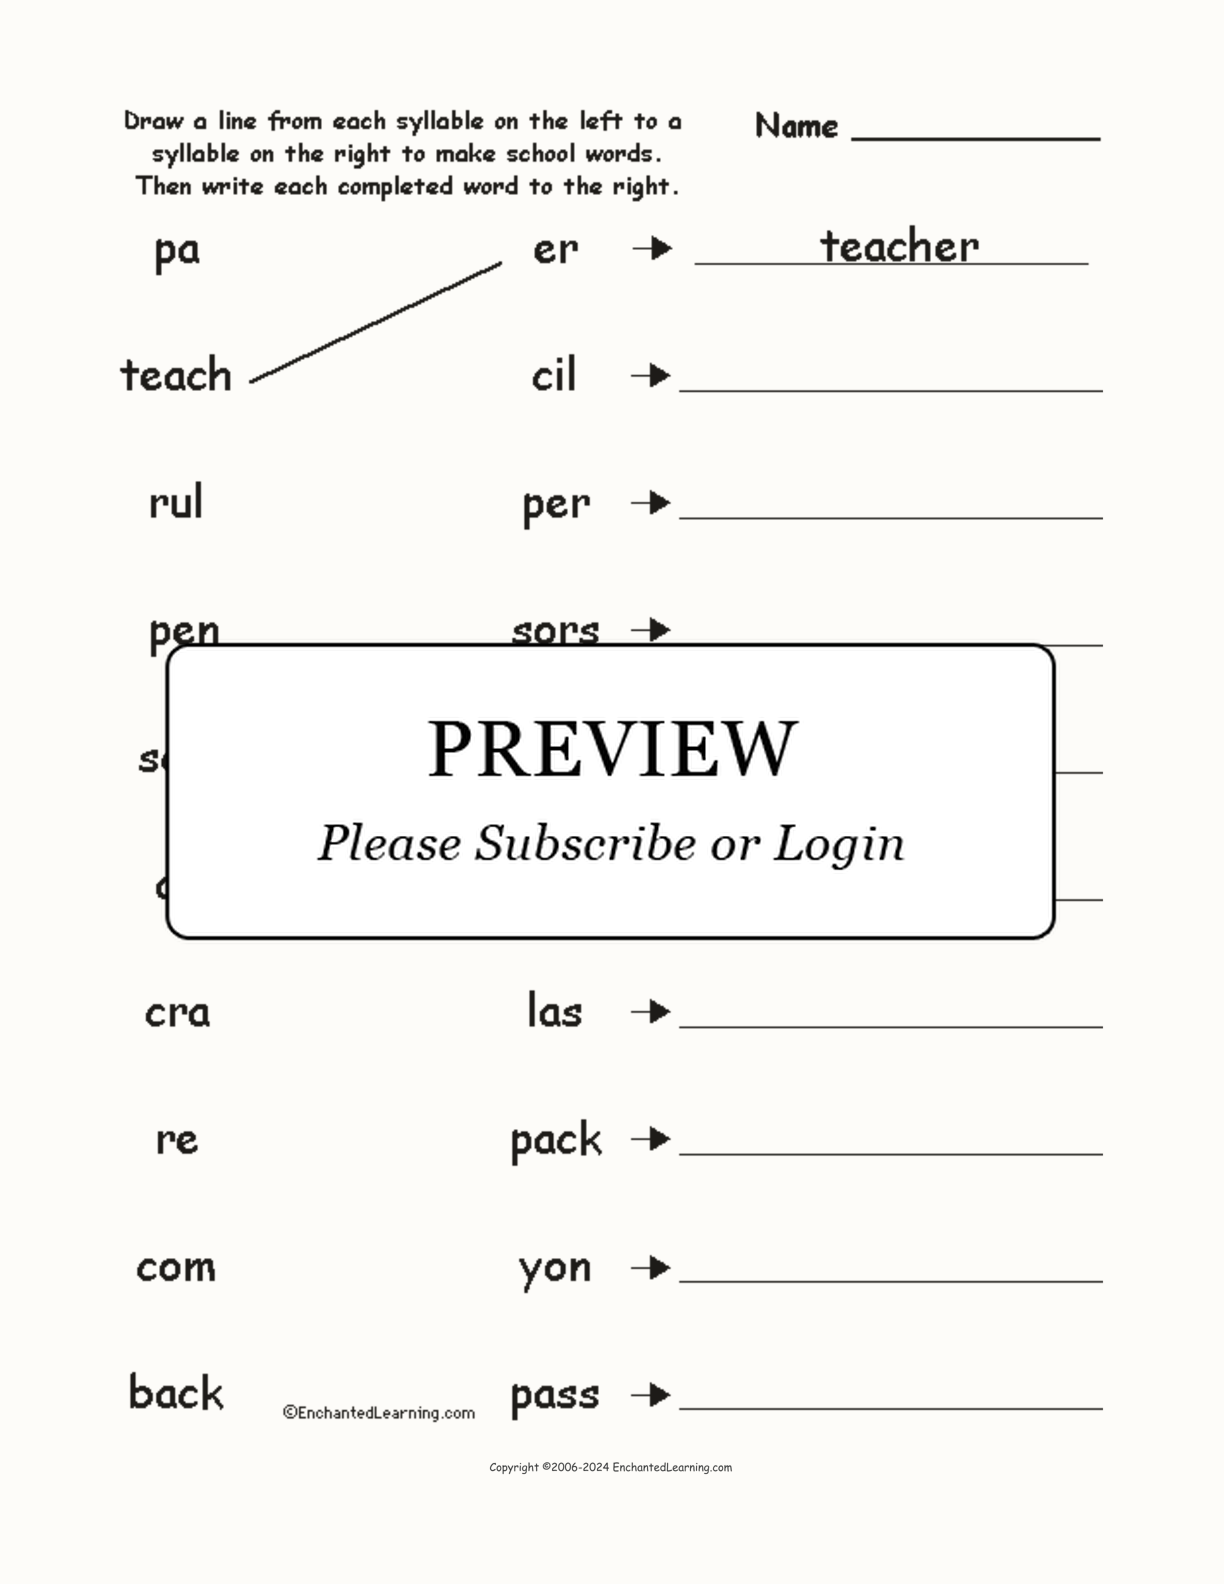 Match the Syllables: School Words interactive worksheet page 1